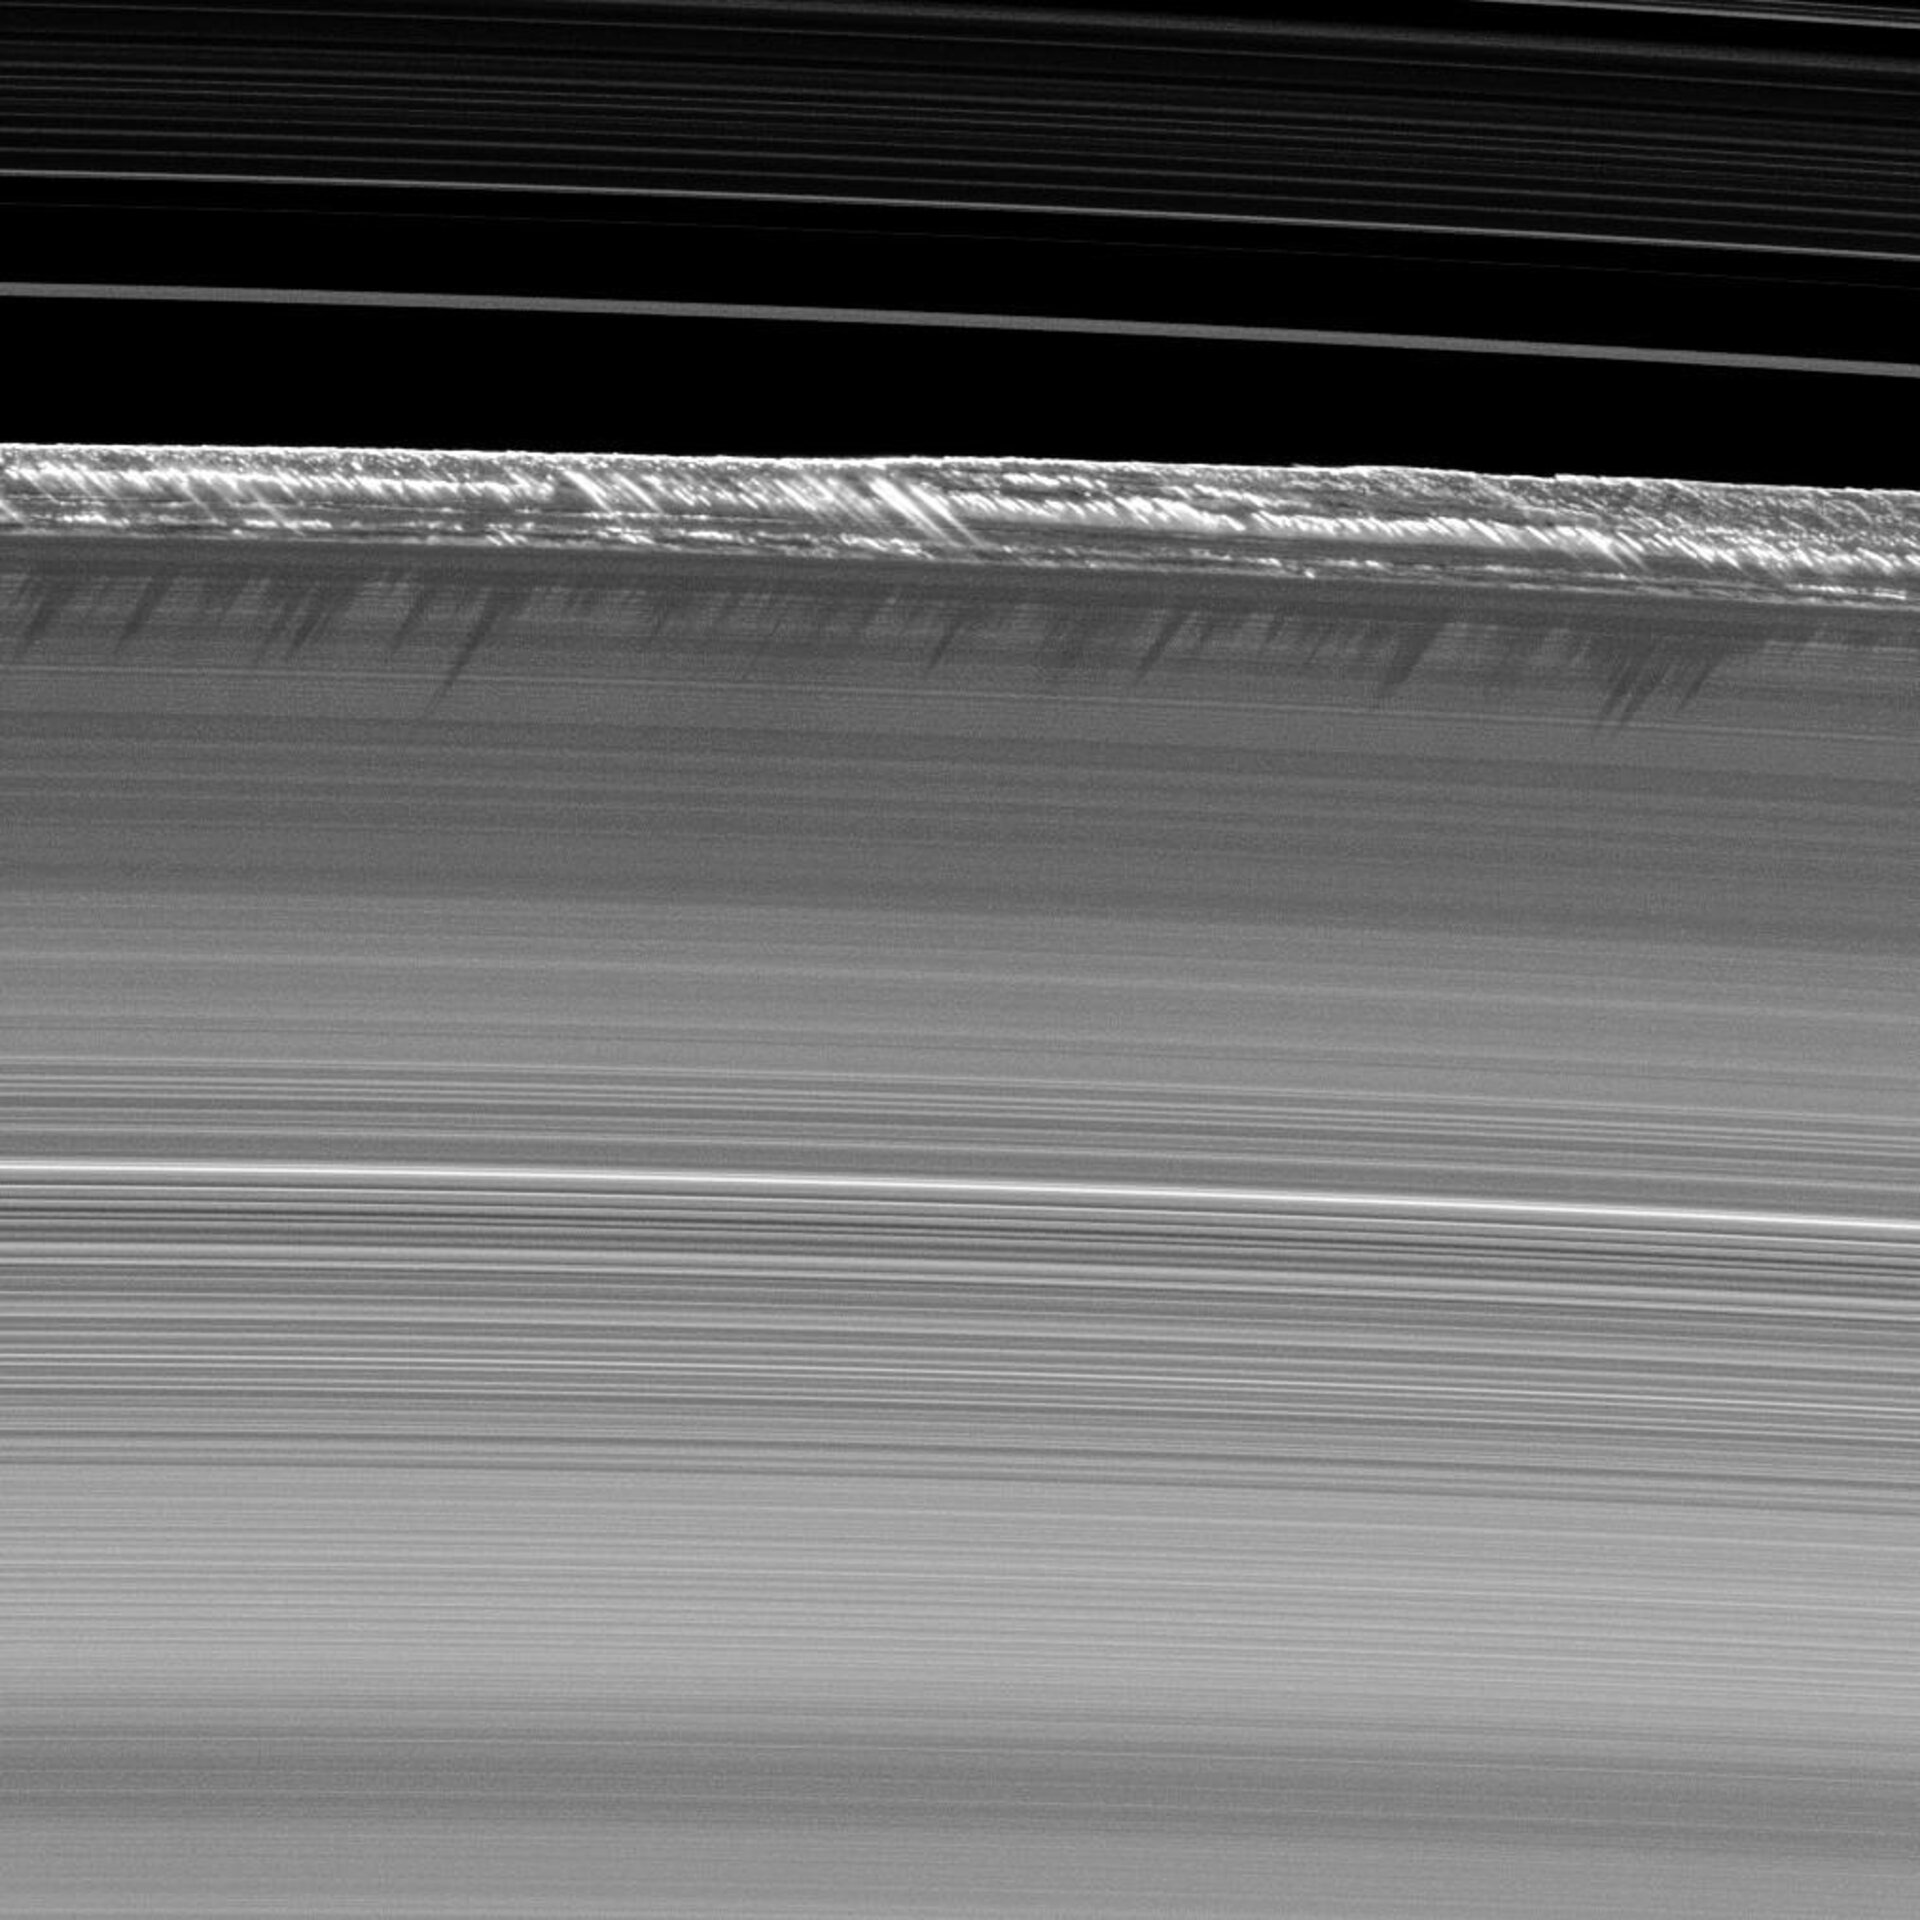 Devastating process will occur when Saturn loses its rings